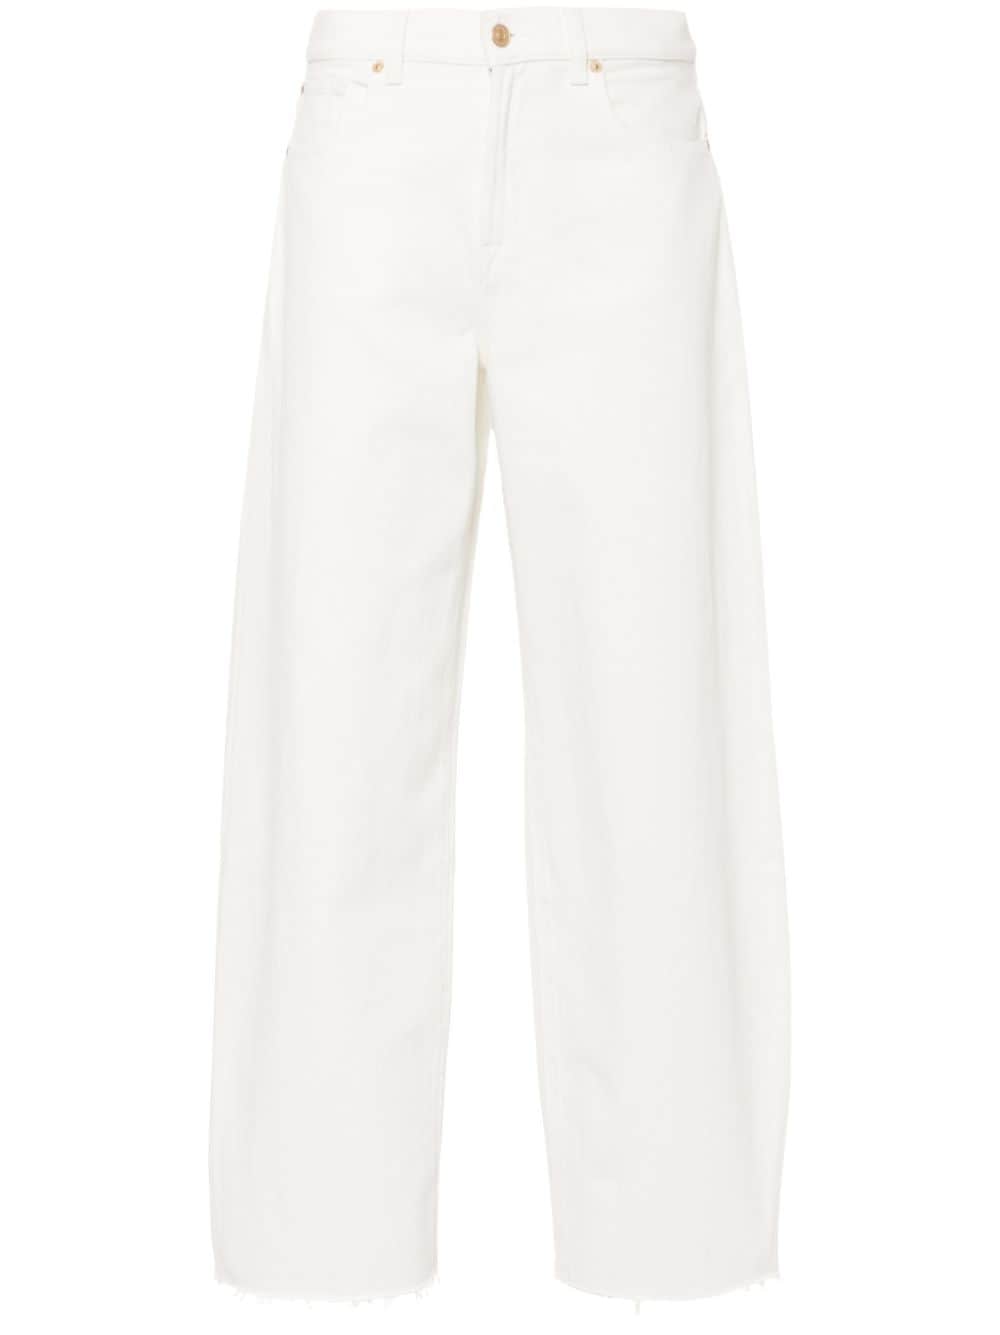 7 For All Mankind Bonnie wide-leg jeans - White von 7 For All Mankind